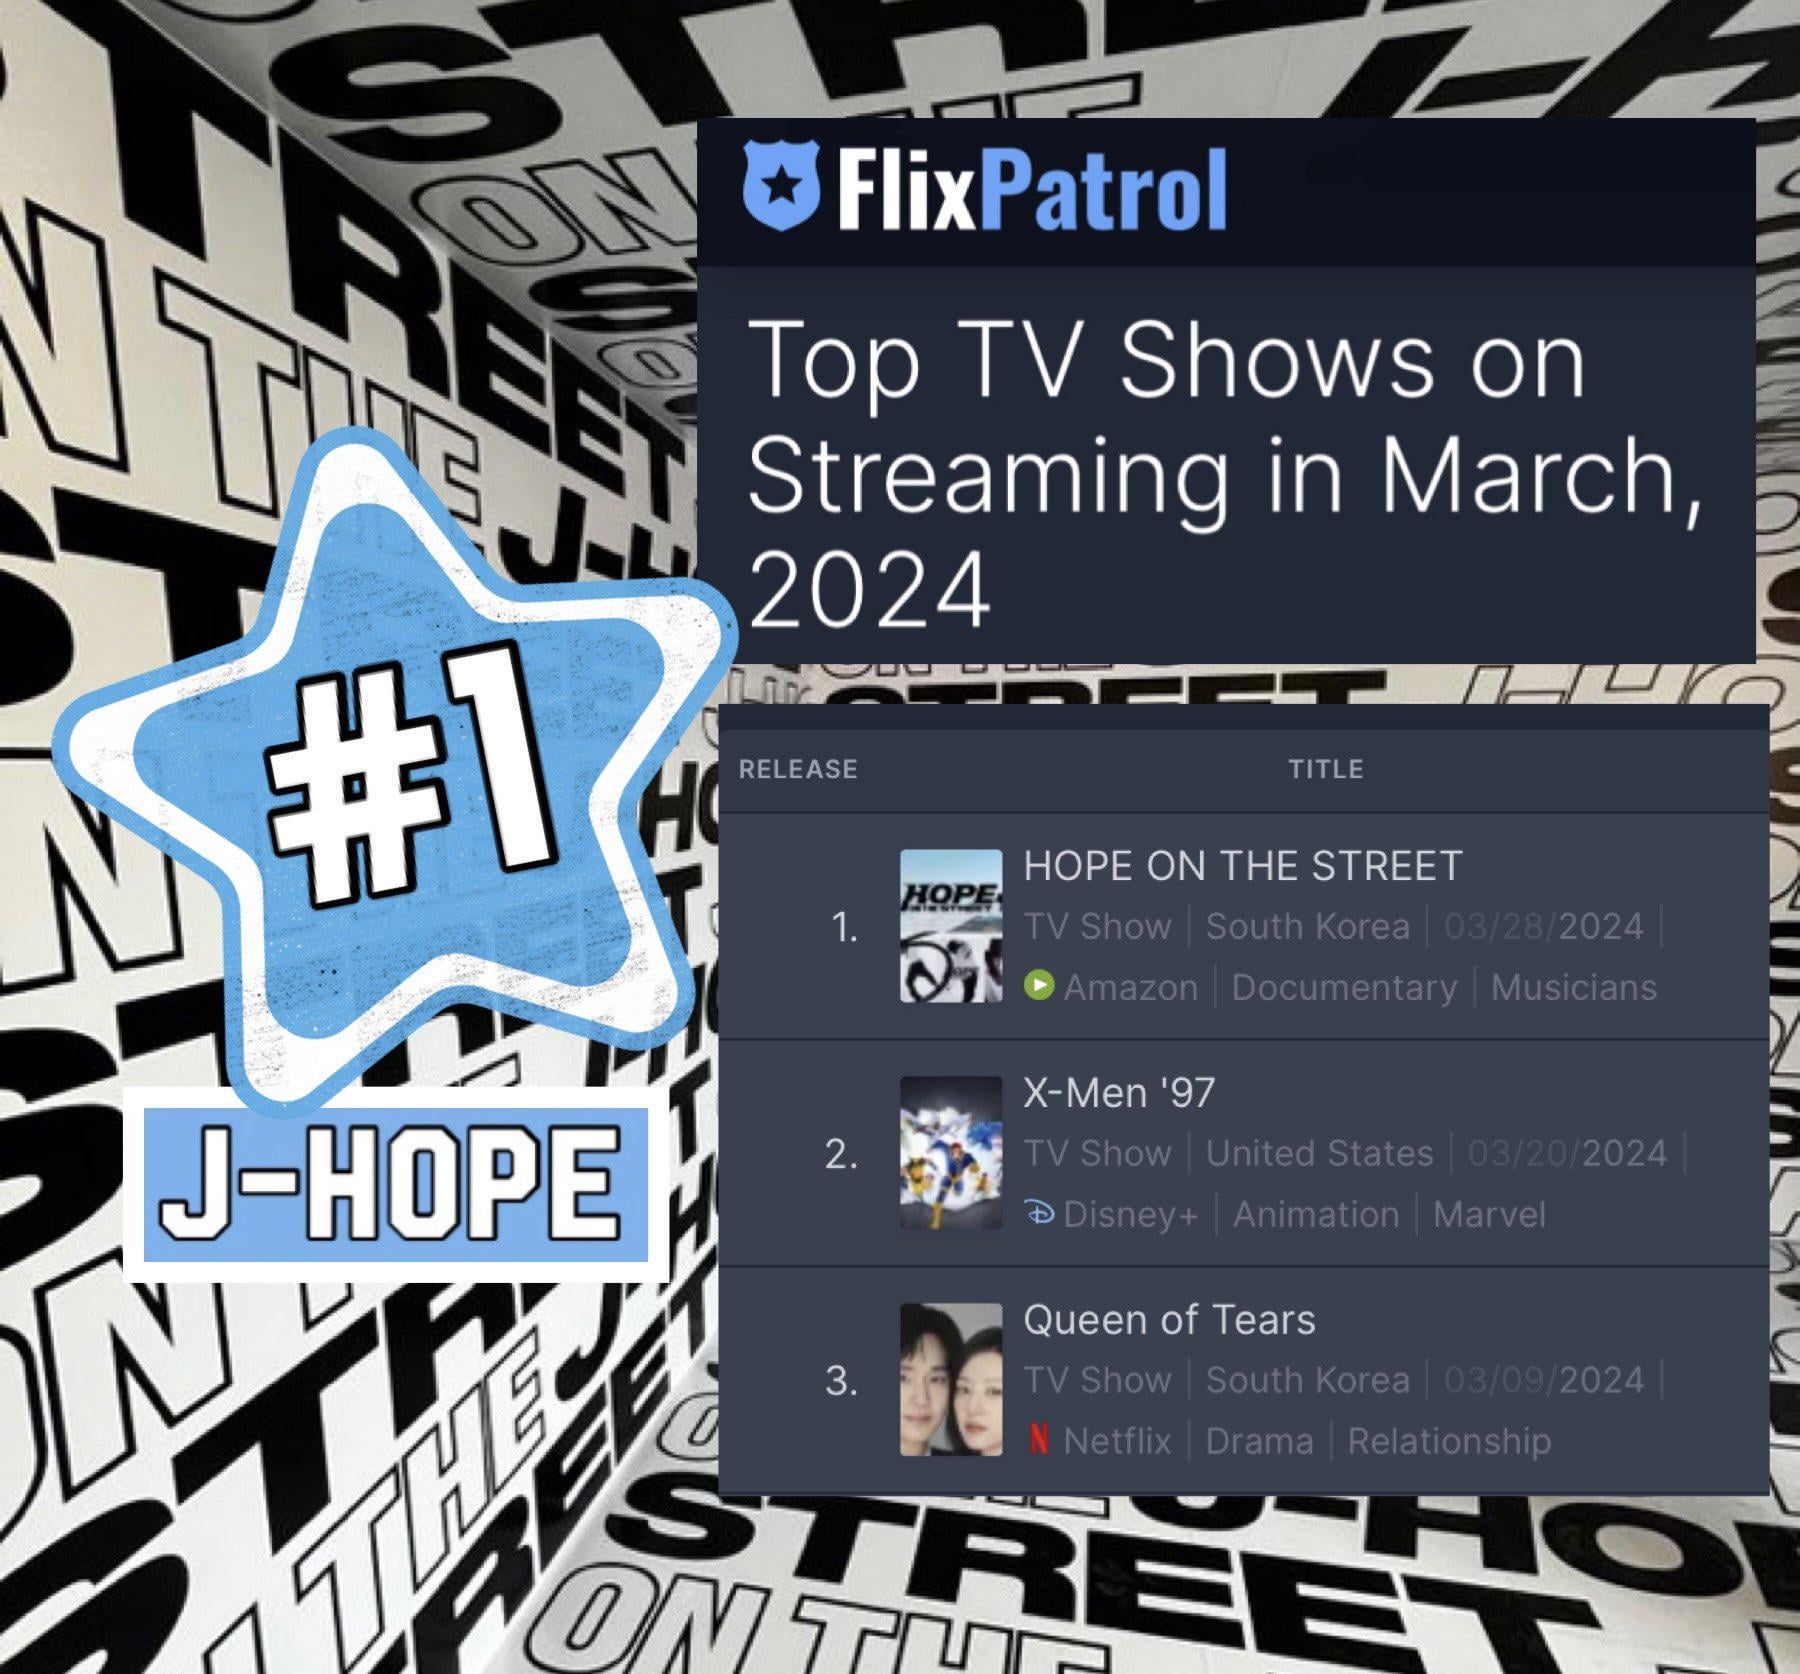 240419 J-Hope’s docu-series “Hope on the Street” on Amazon Prime was the #1 Top TV Show streaming in March 2024 according to Flix Patrol